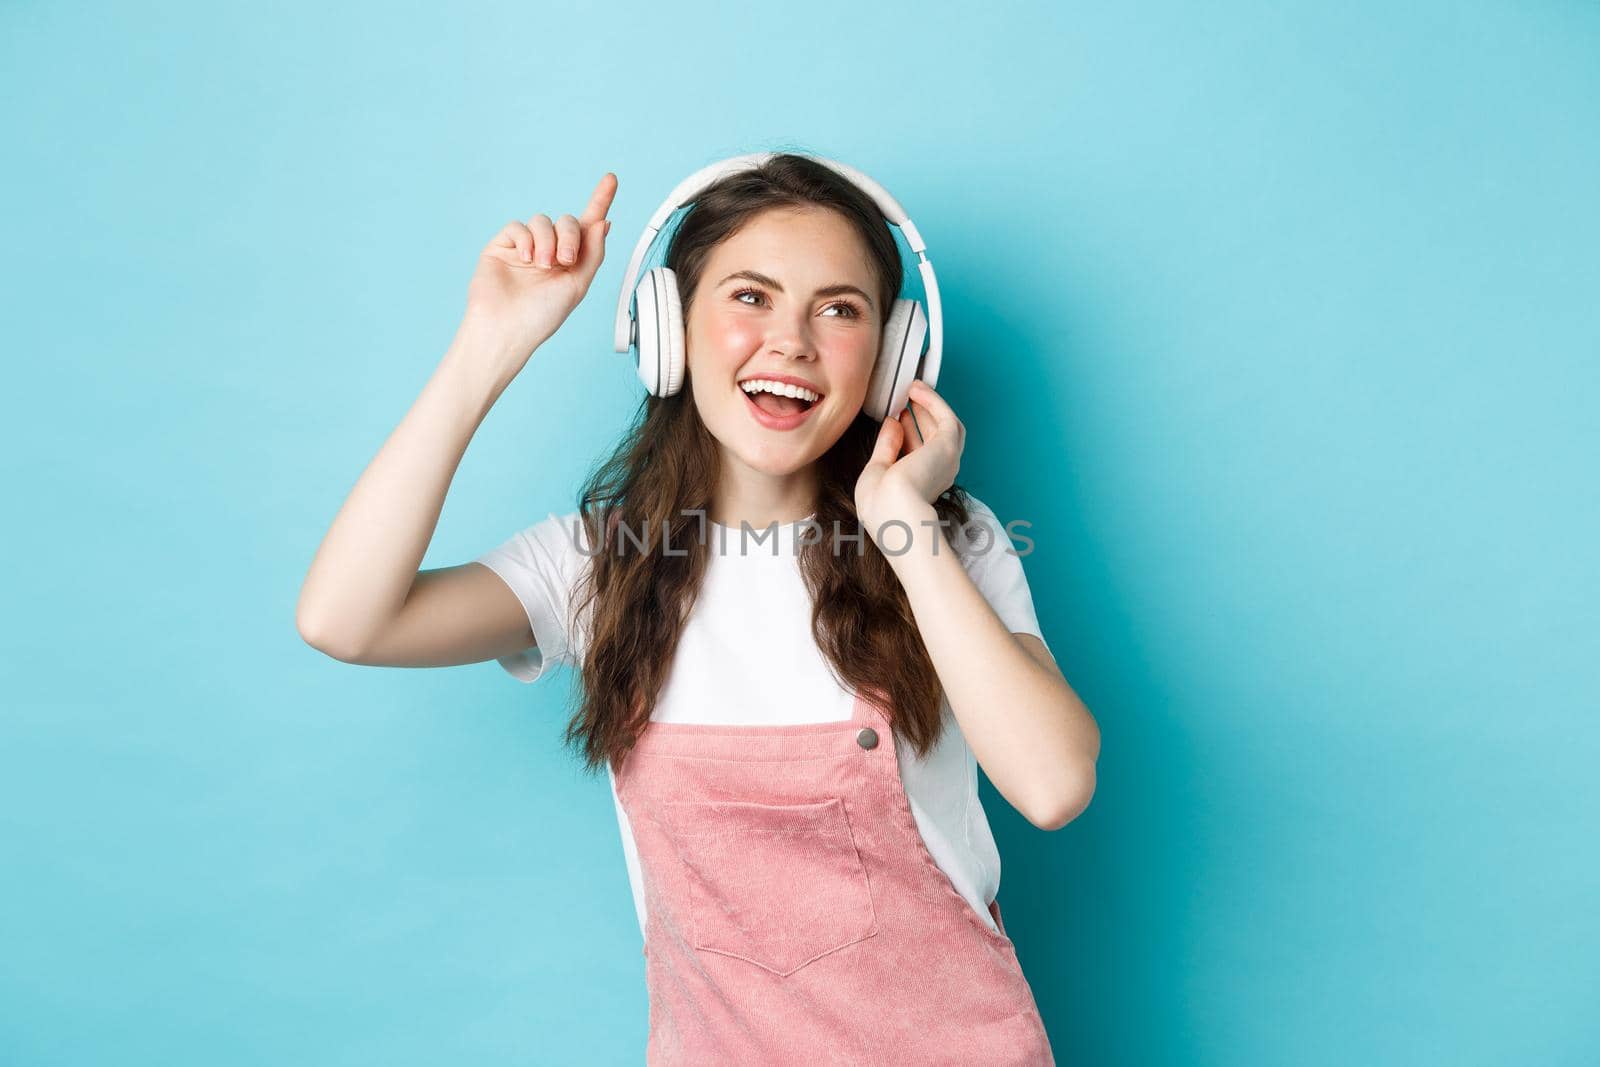 Young woman dancing and listening music in headphones, raise hand up and smiling carefree, enjoying favourite song, standing over blue background.